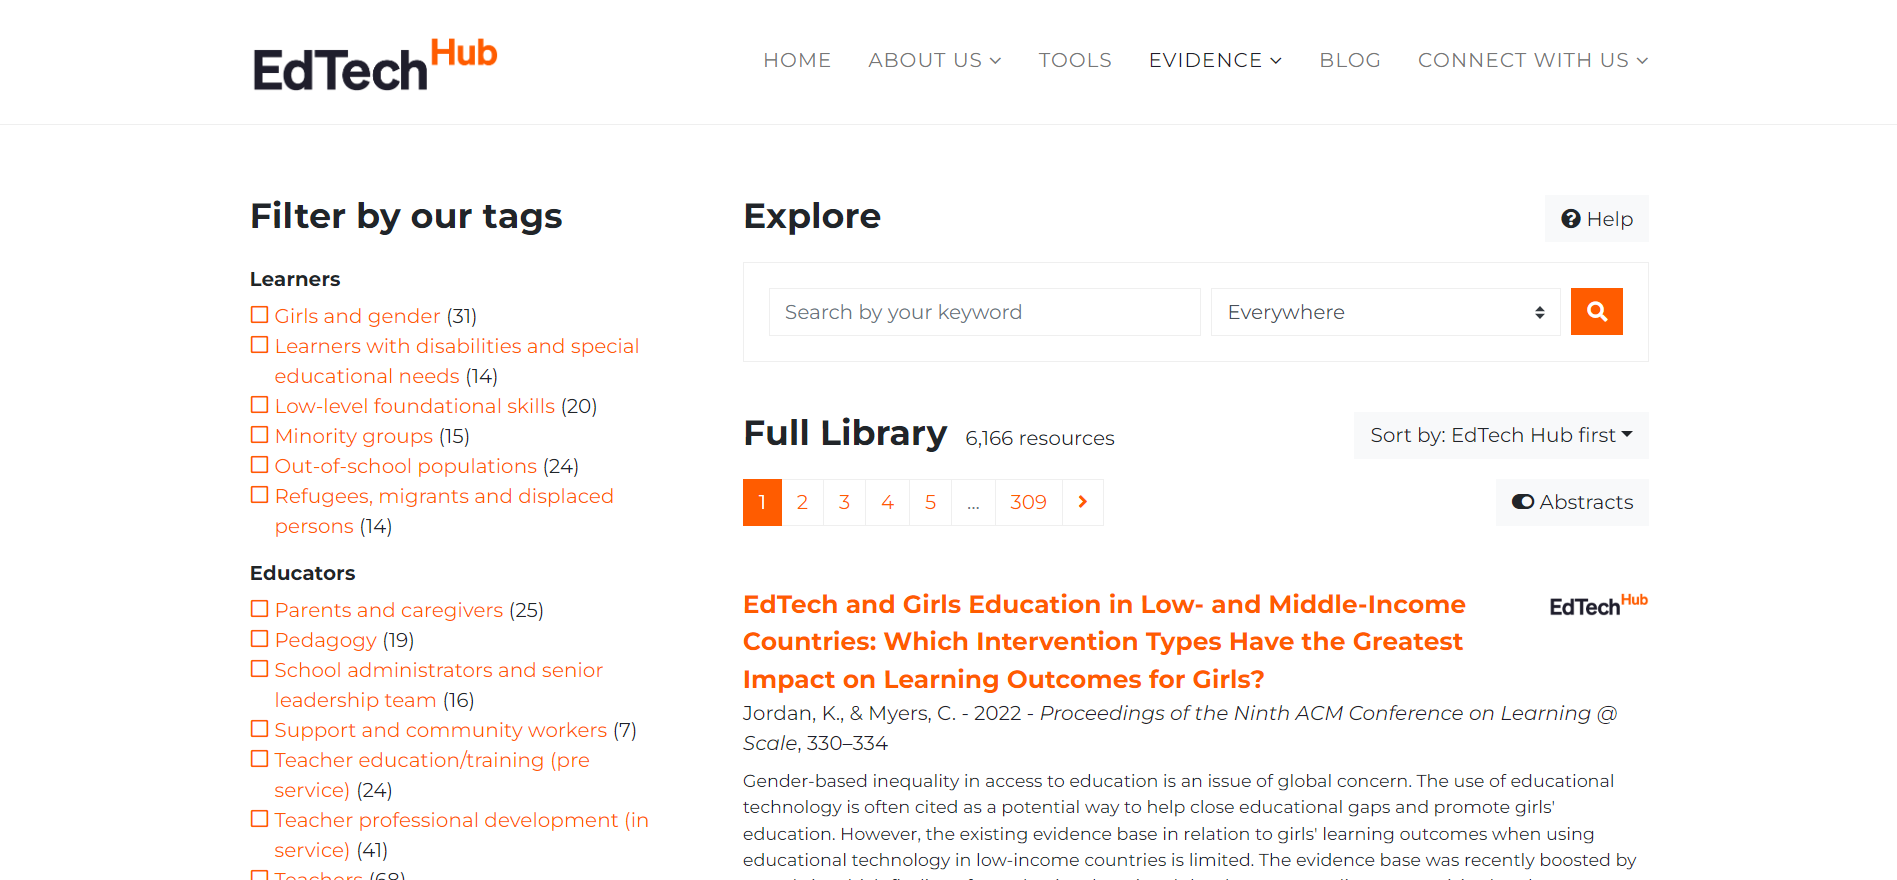 Evidence library of the EdTech Hub